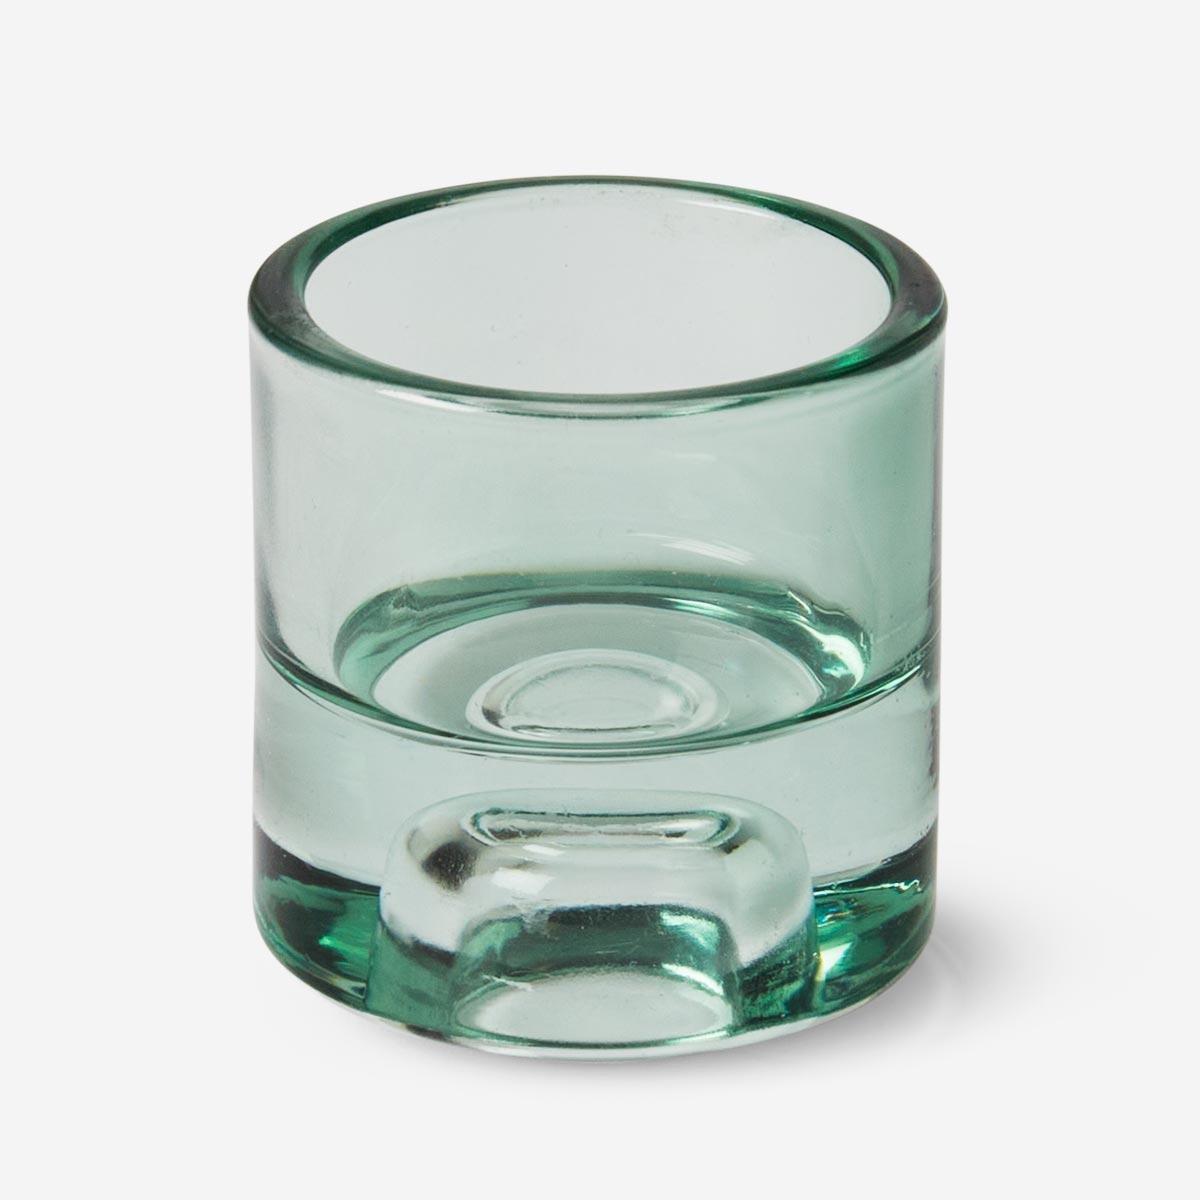 Green candle holder